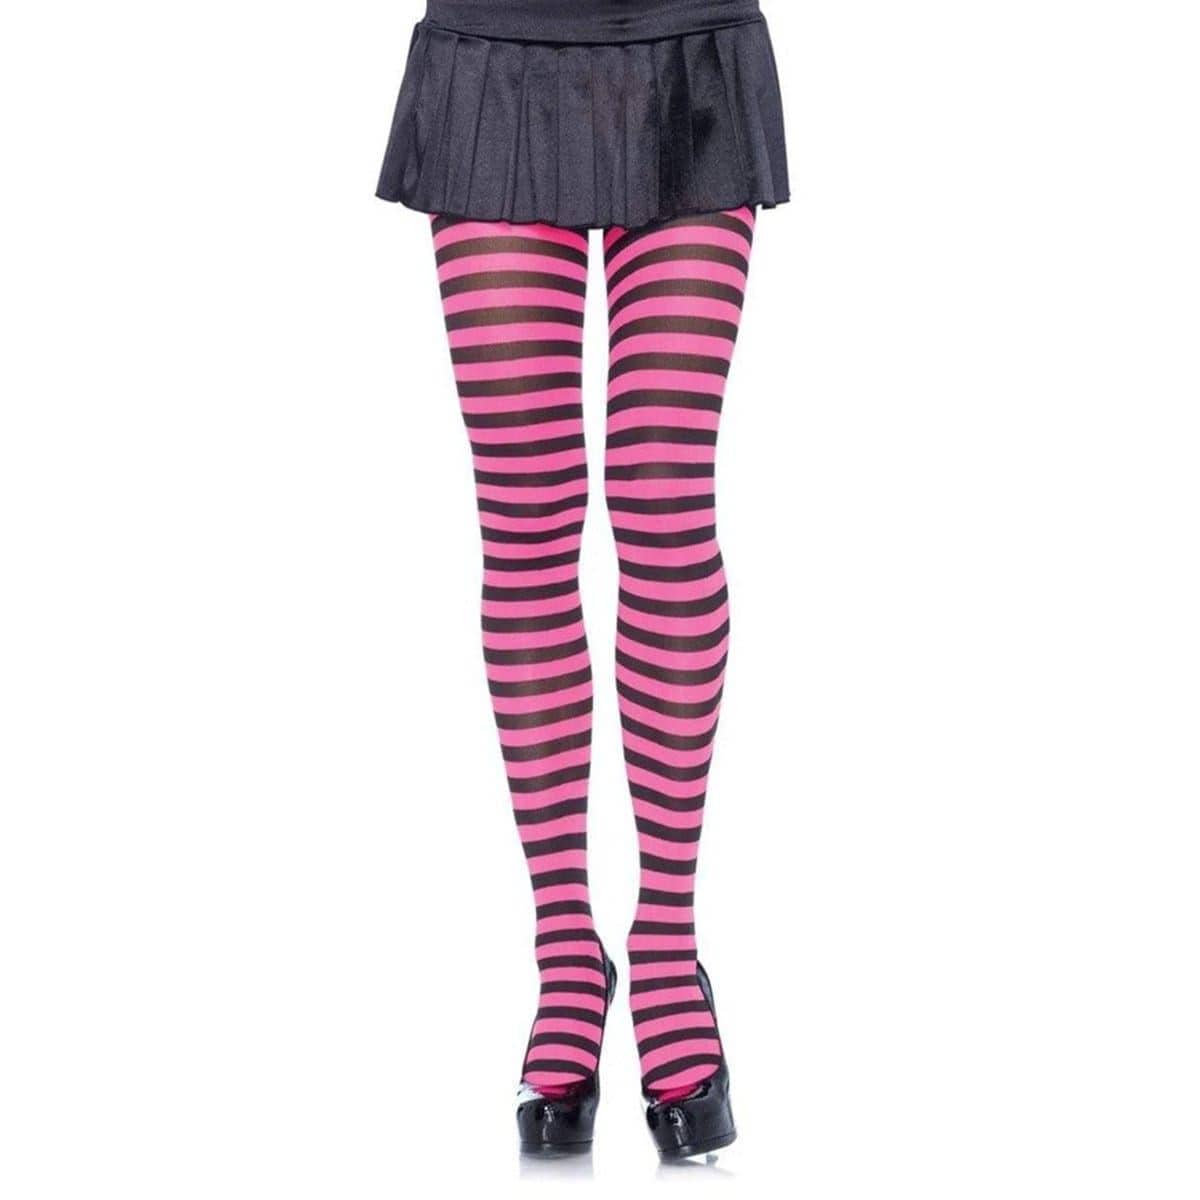 Black & pink striped nylon tights for women